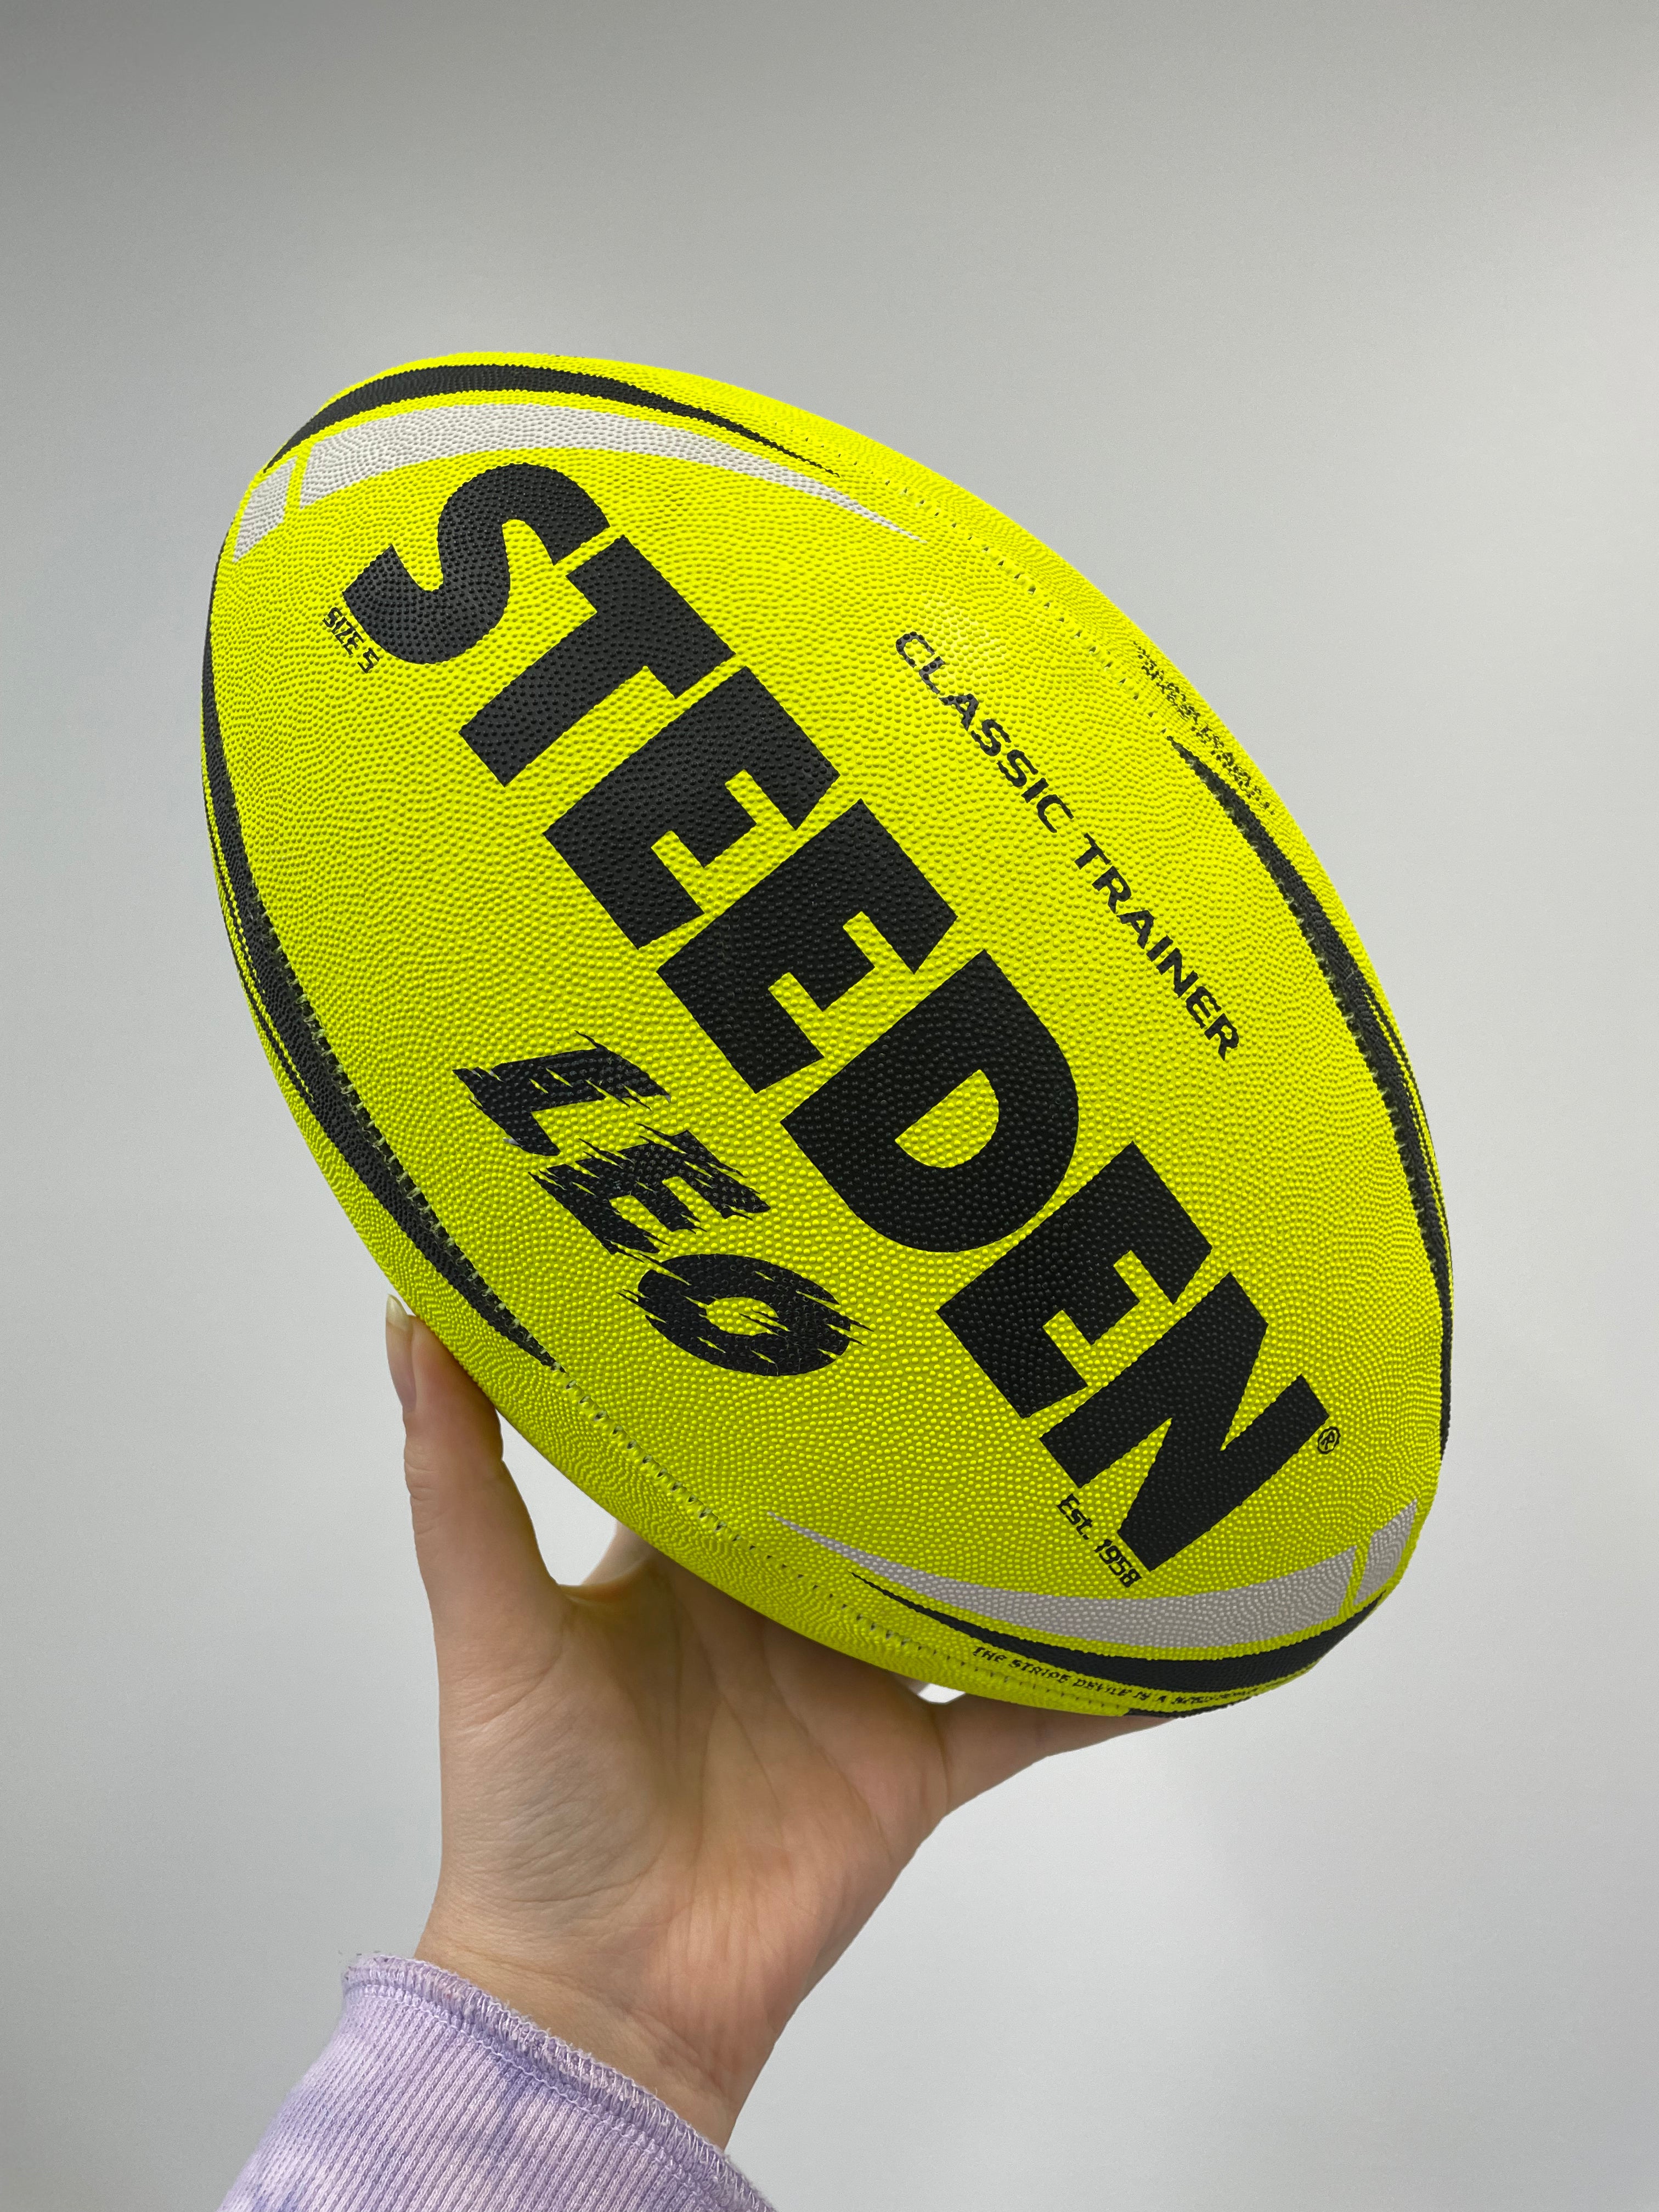 Personalised Yellow Steeden Rugby League Balls (Size 5)